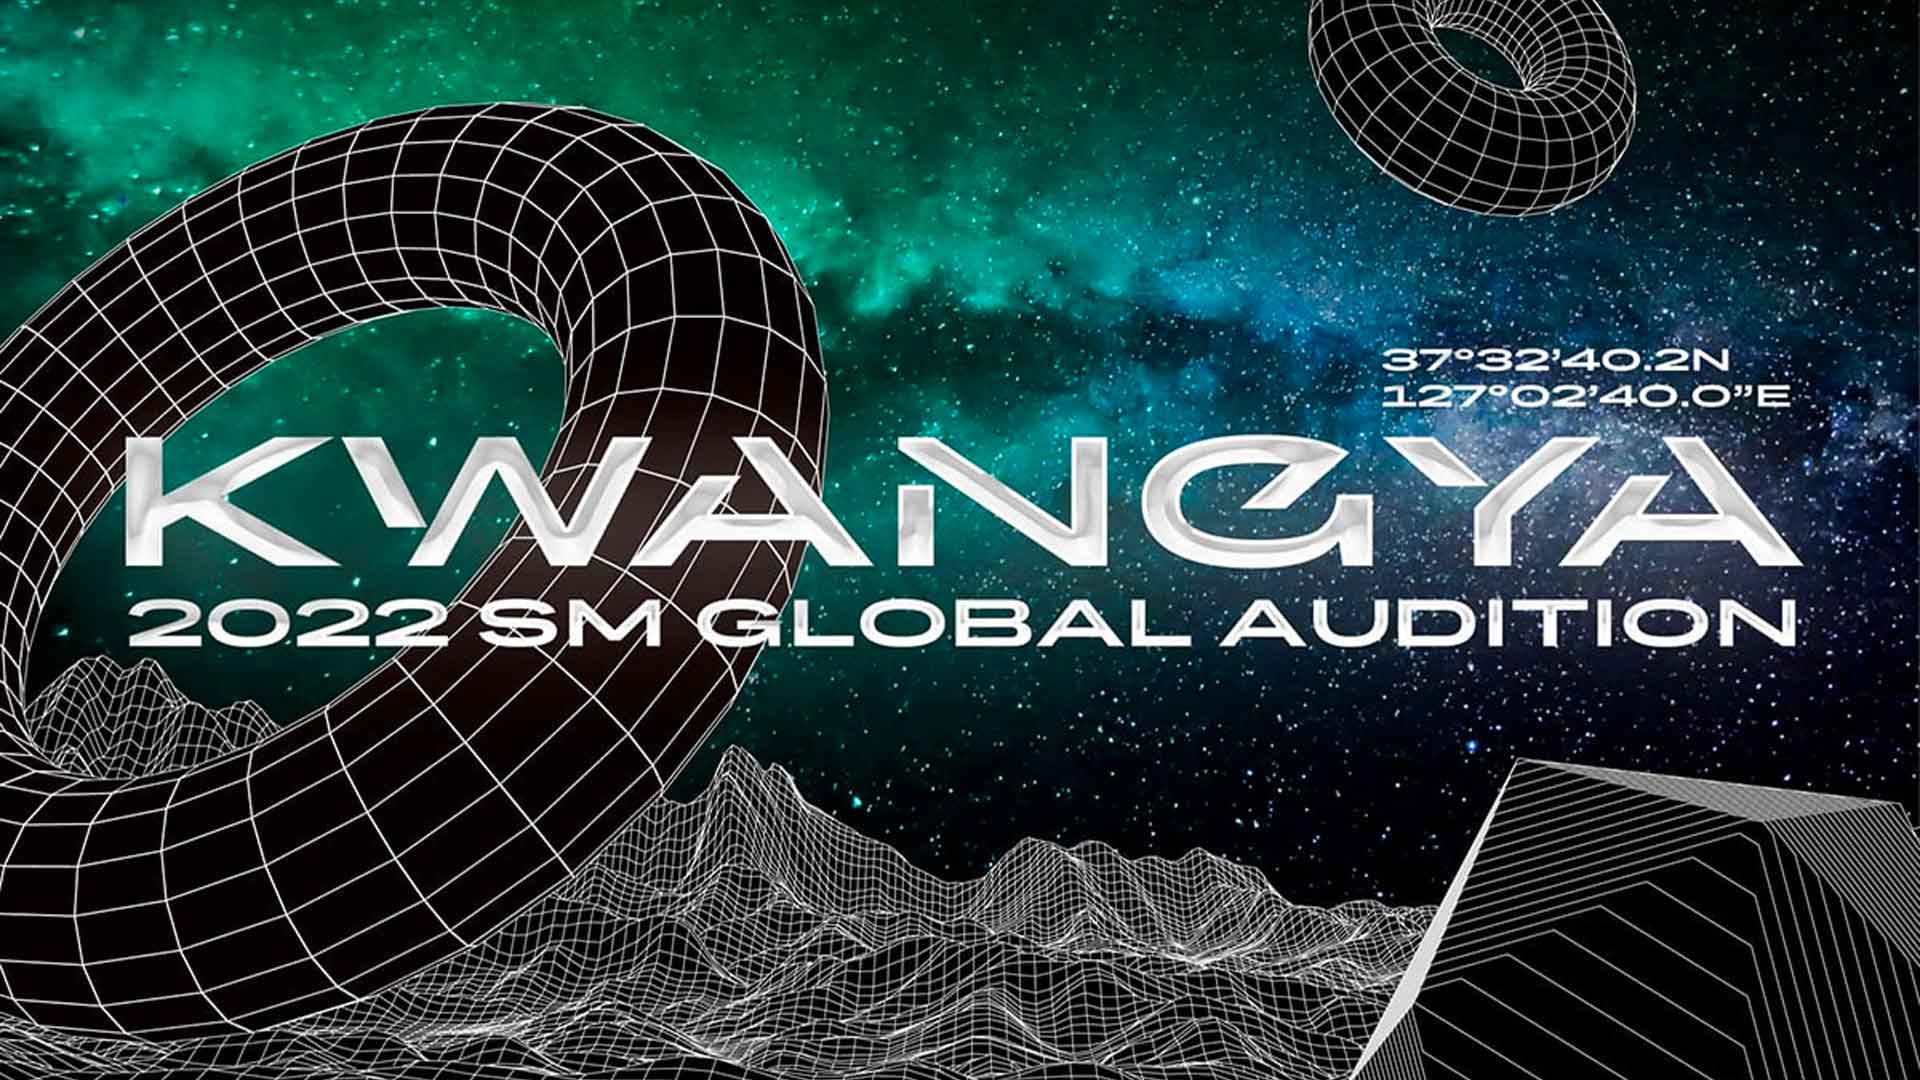 Here’s How You Can Join SM Entertainment’s Latest Global Audition